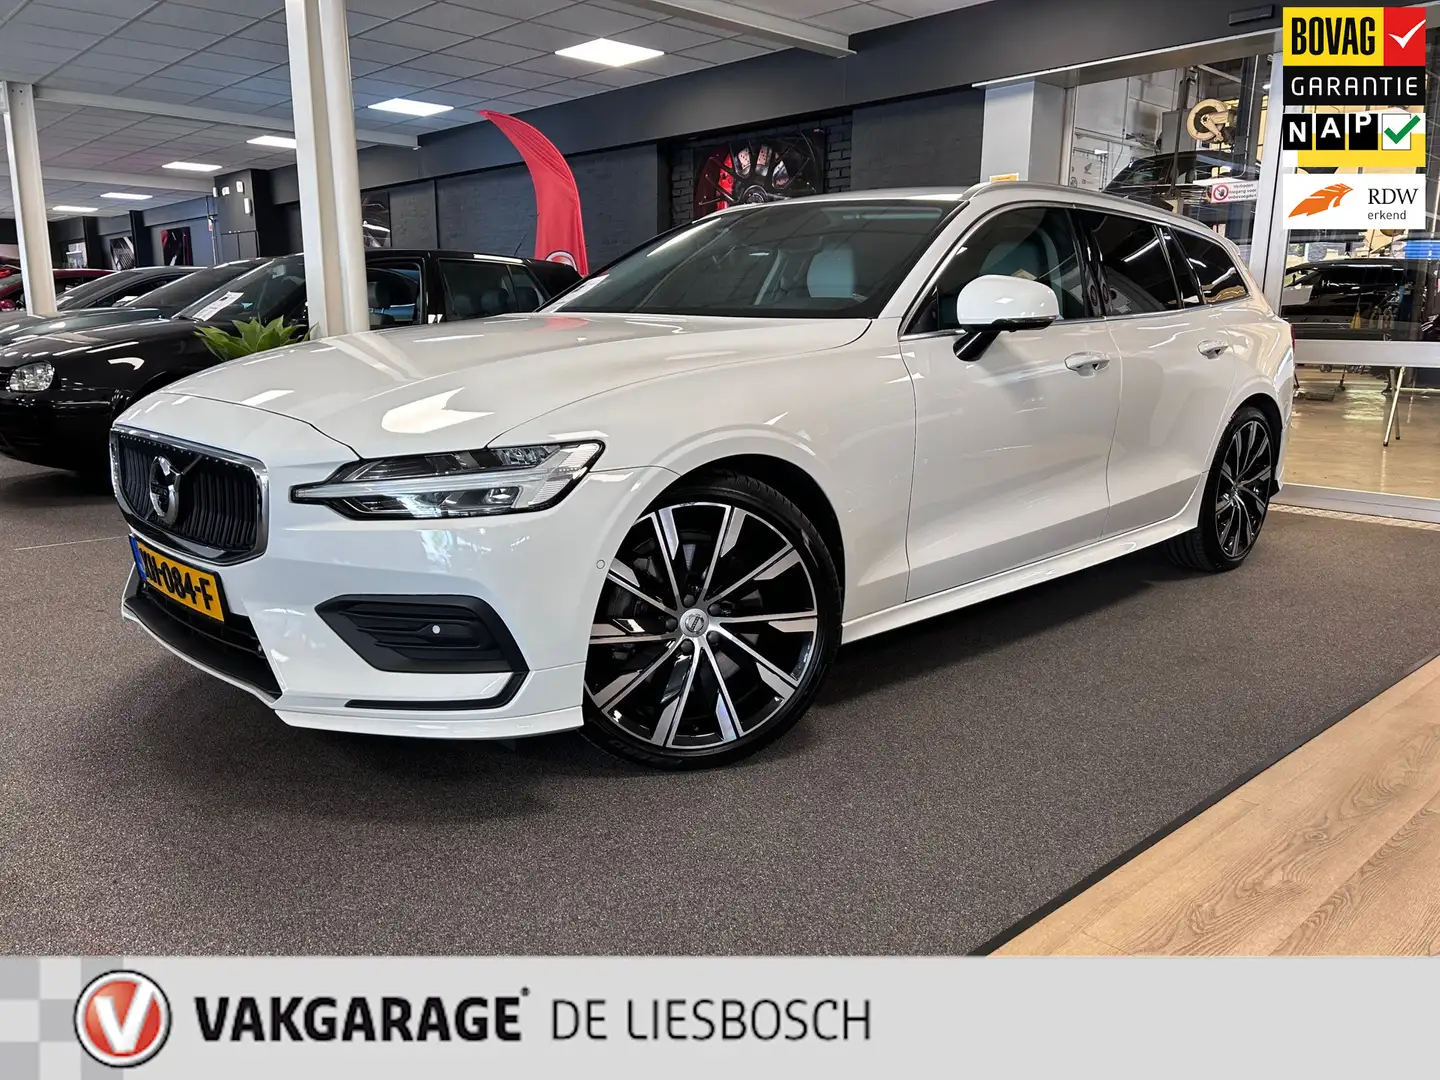 Volvo V60 2.0 T5 Momentum/Styling kit/Automaat/Led/20inch/36 Blanco - 1